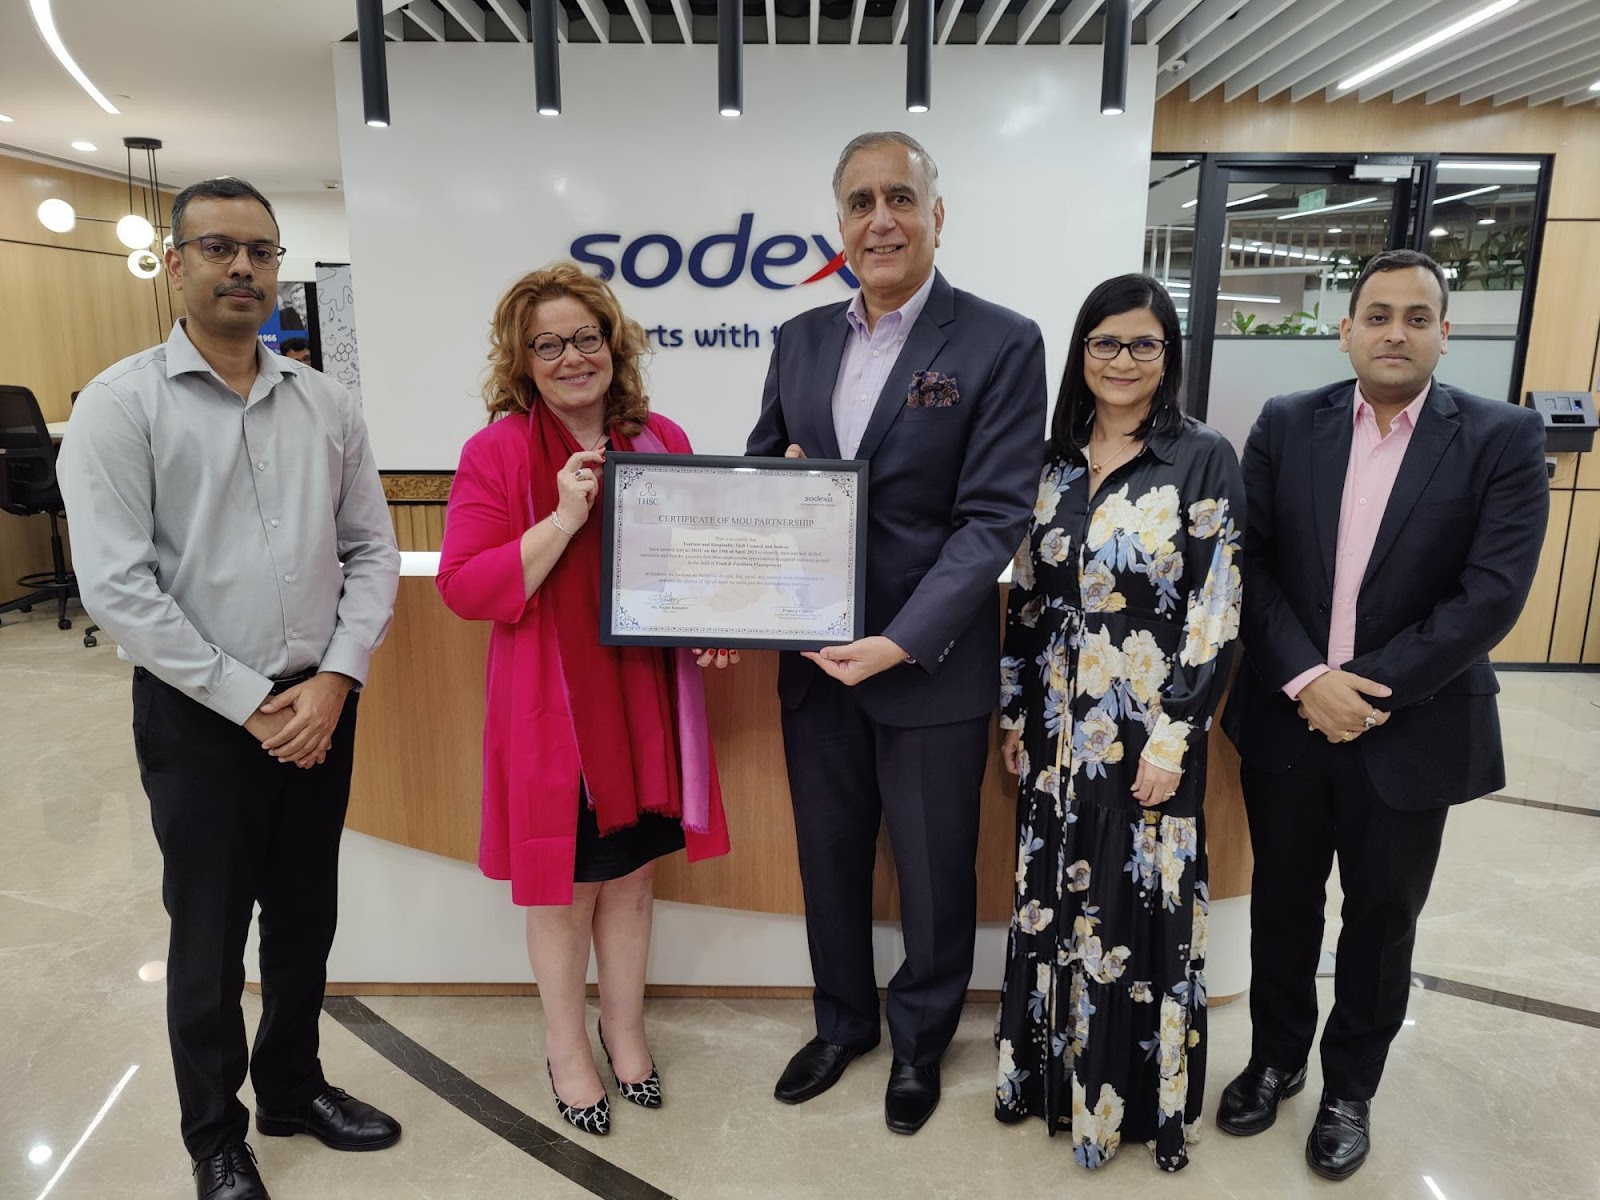 Sodexo signs MOU to shape the employee landscape for a more inclusive world